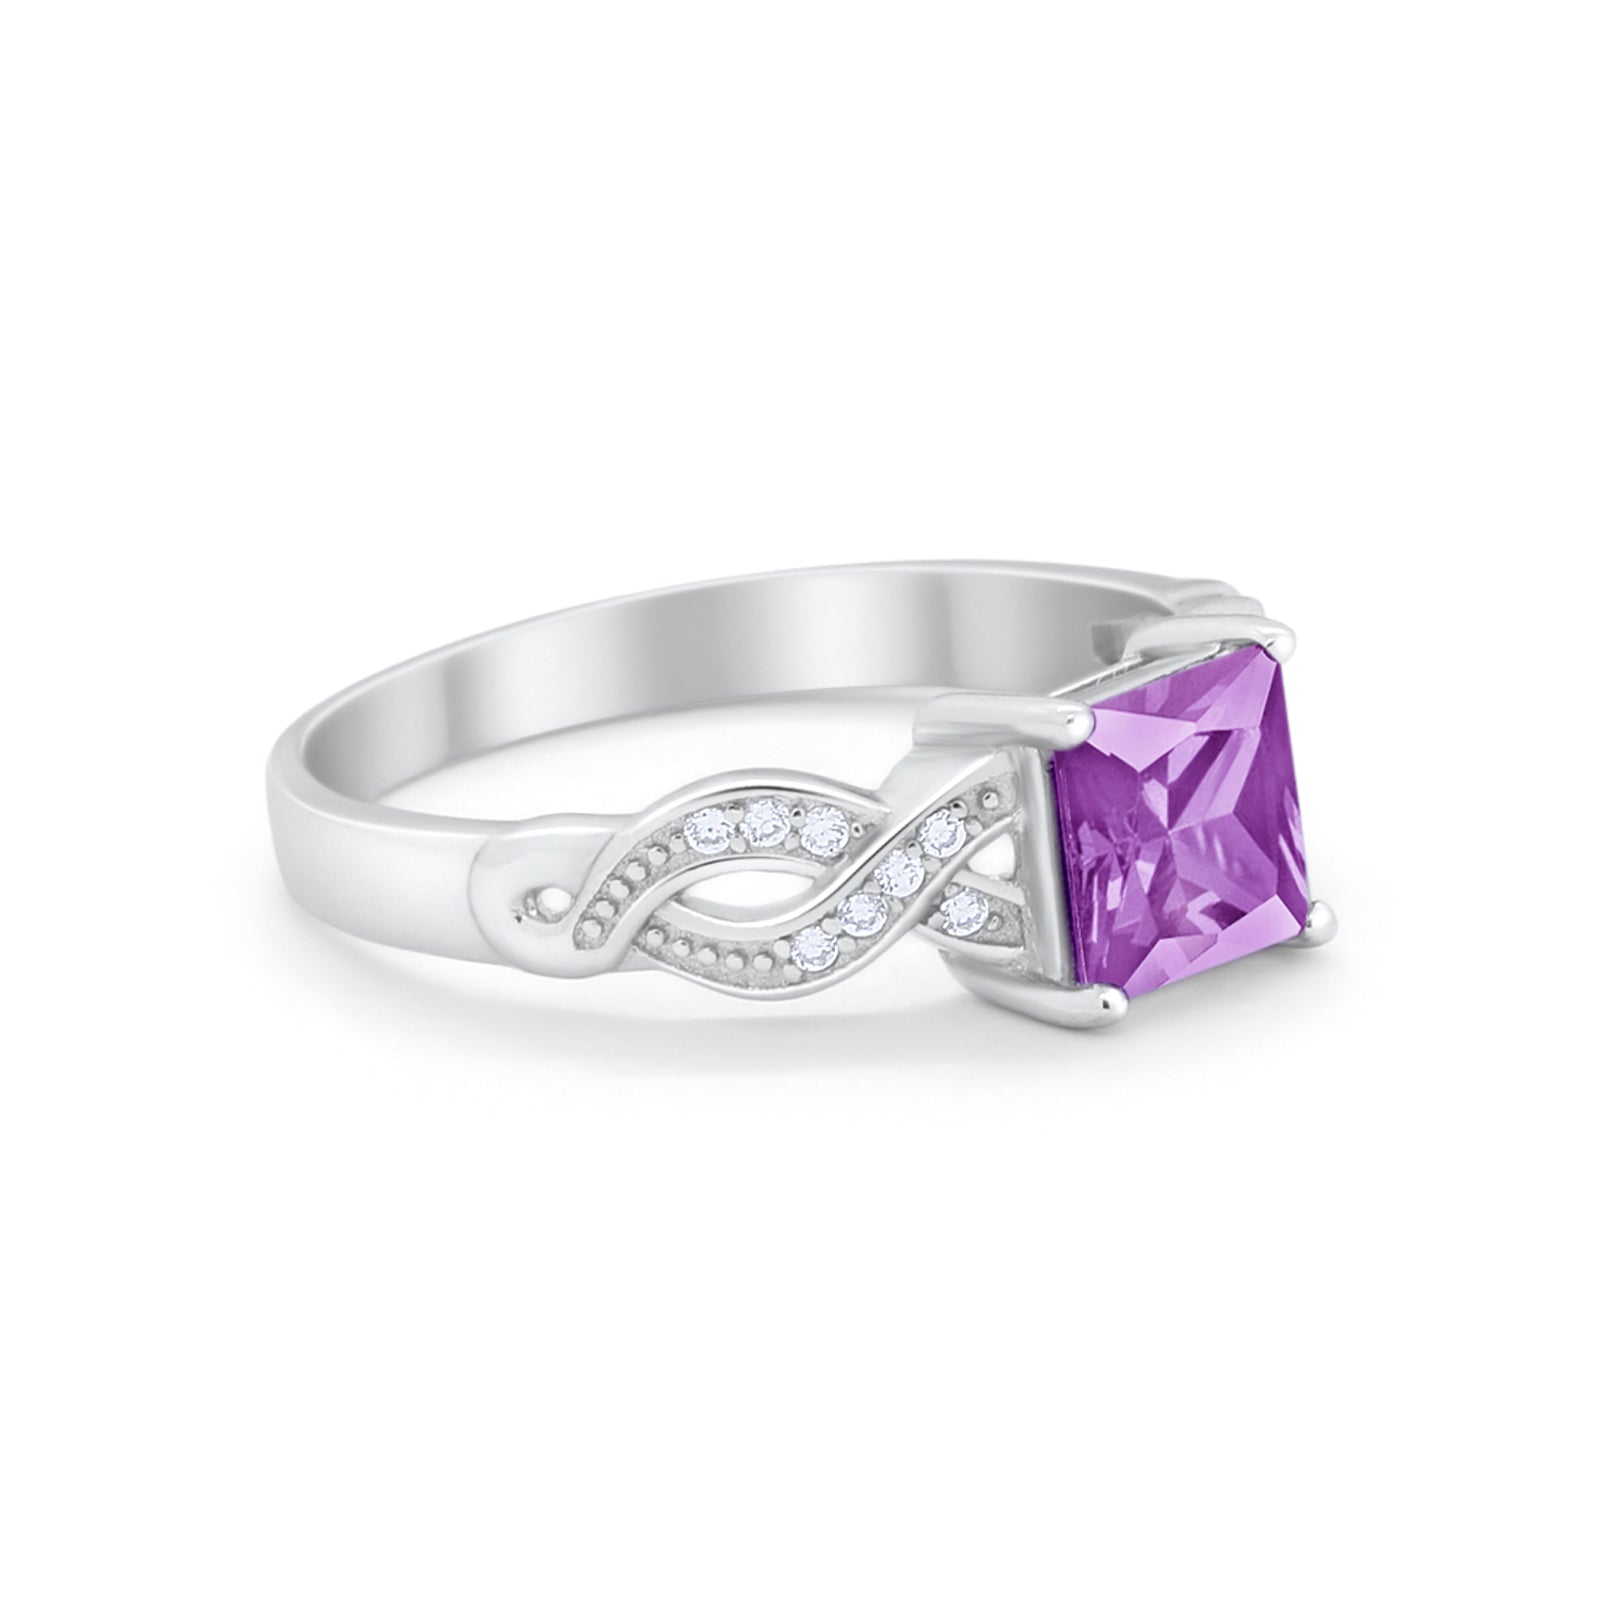 Solitaire Infinity Shank Ring Princess Cut Simulated Lavender CZ 925 Sterling Silver